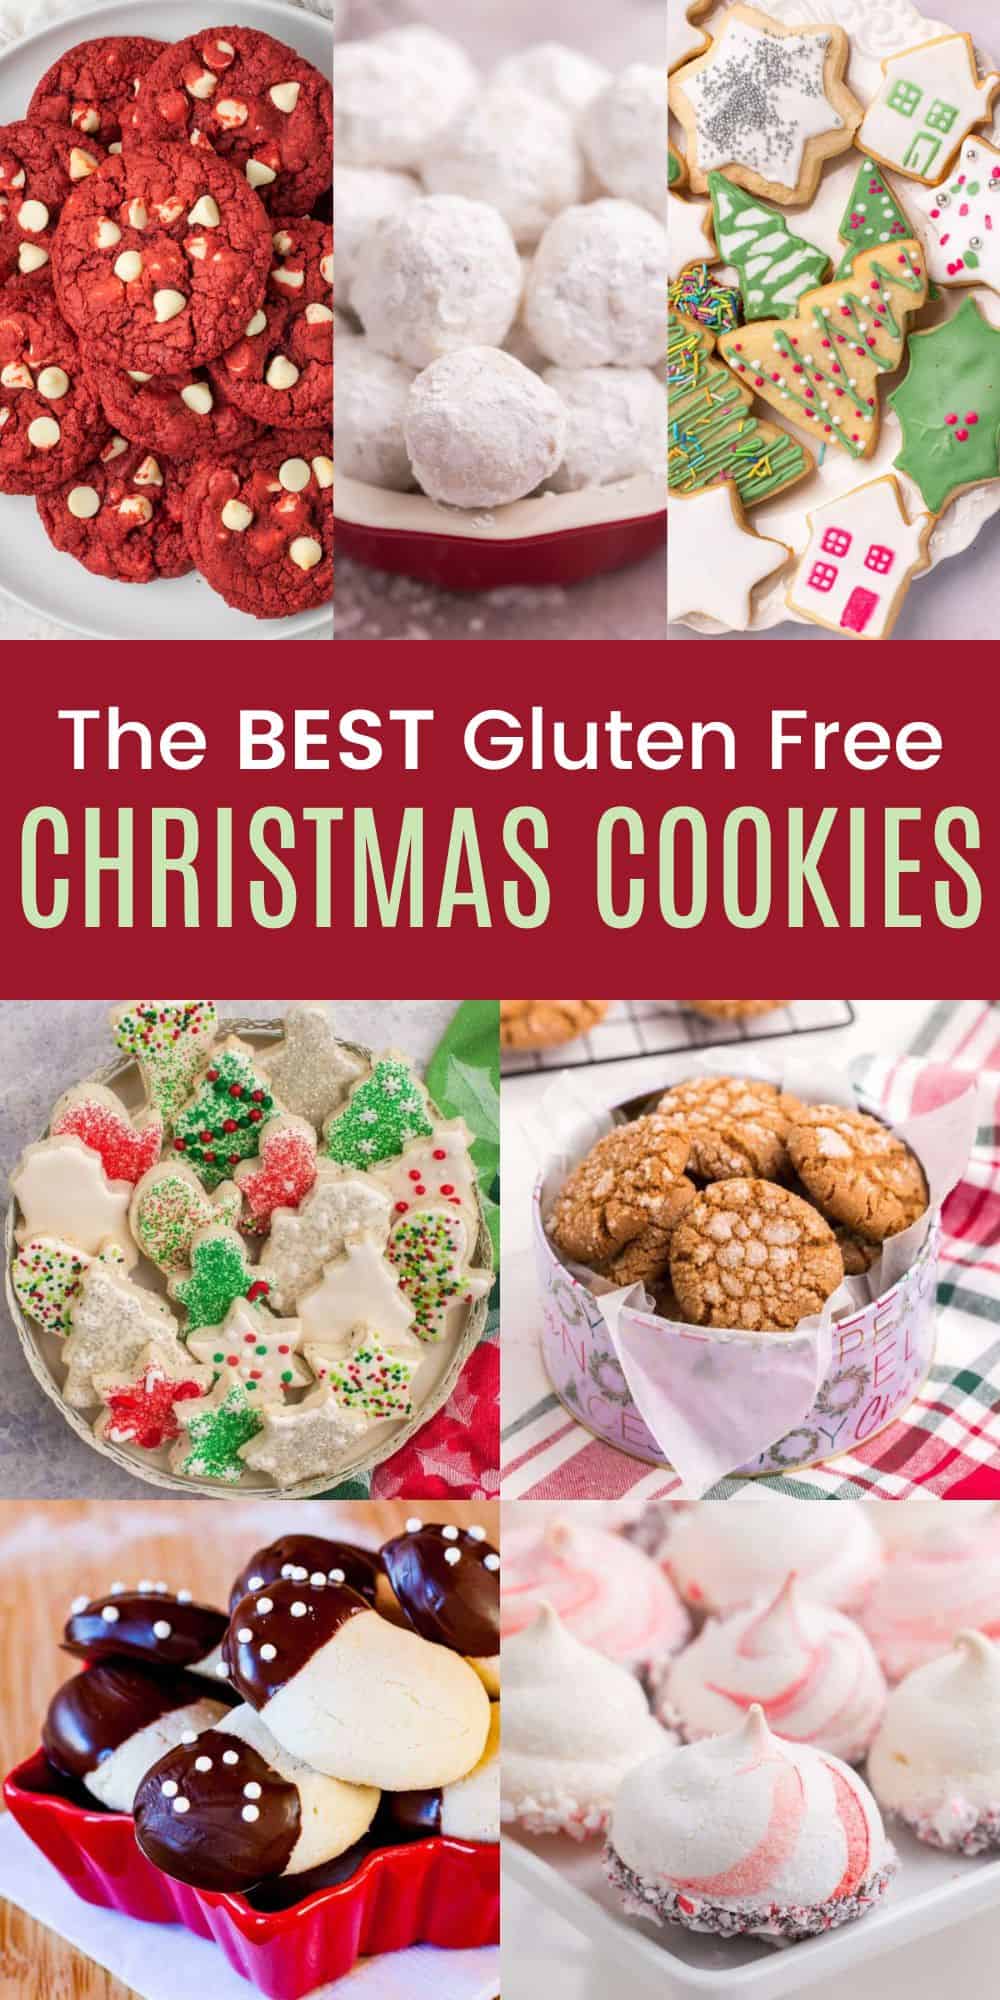 25 Gluten Free Christmas Cookies | Cupcakes and Kale Chips